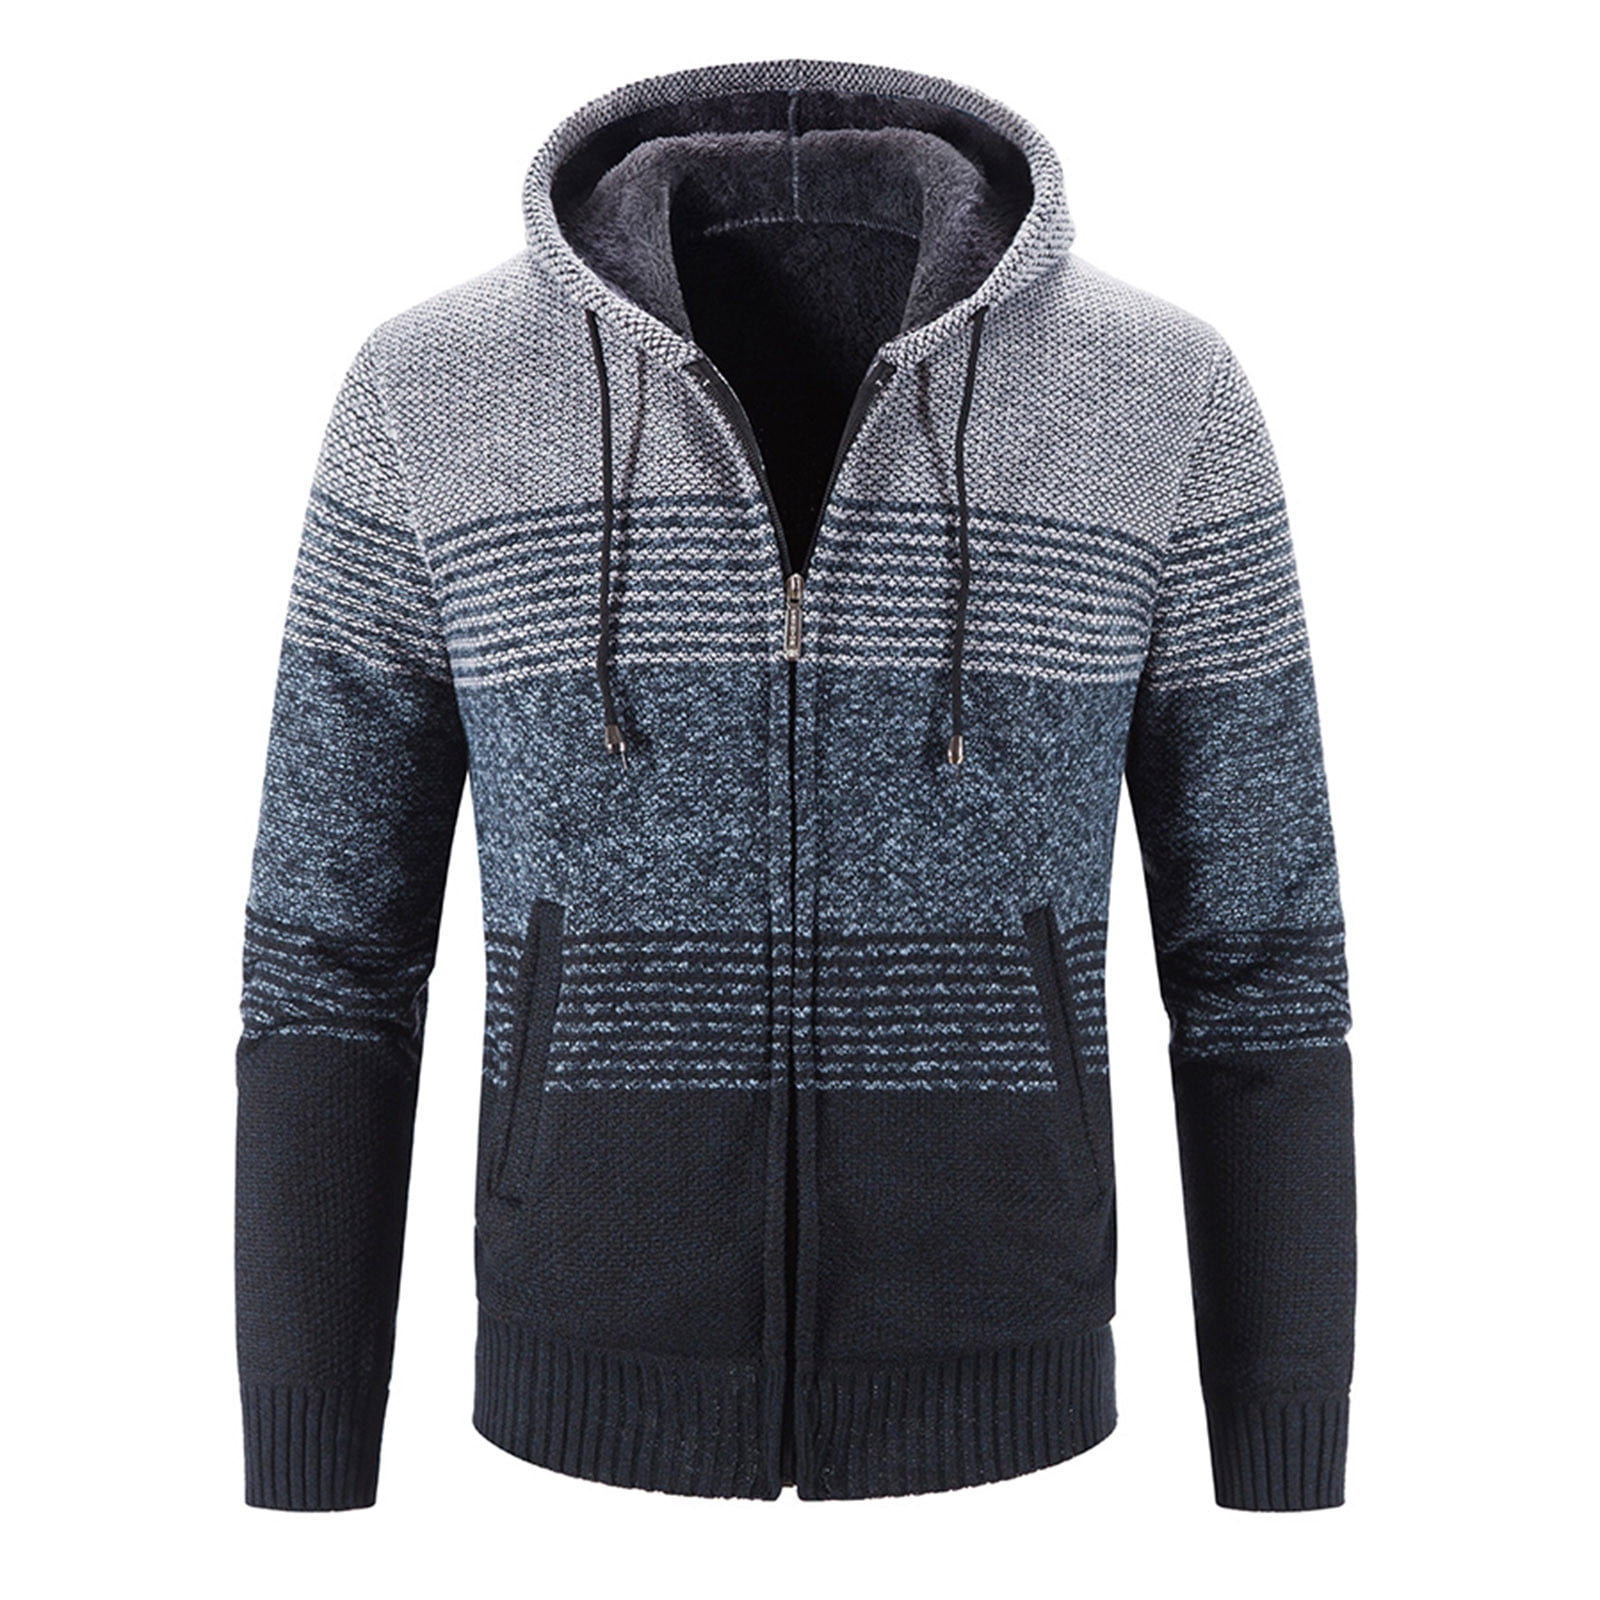 Kcodviy Men's Hooded Stripes And Velvet Padded Warm Cardigan Knitted ...